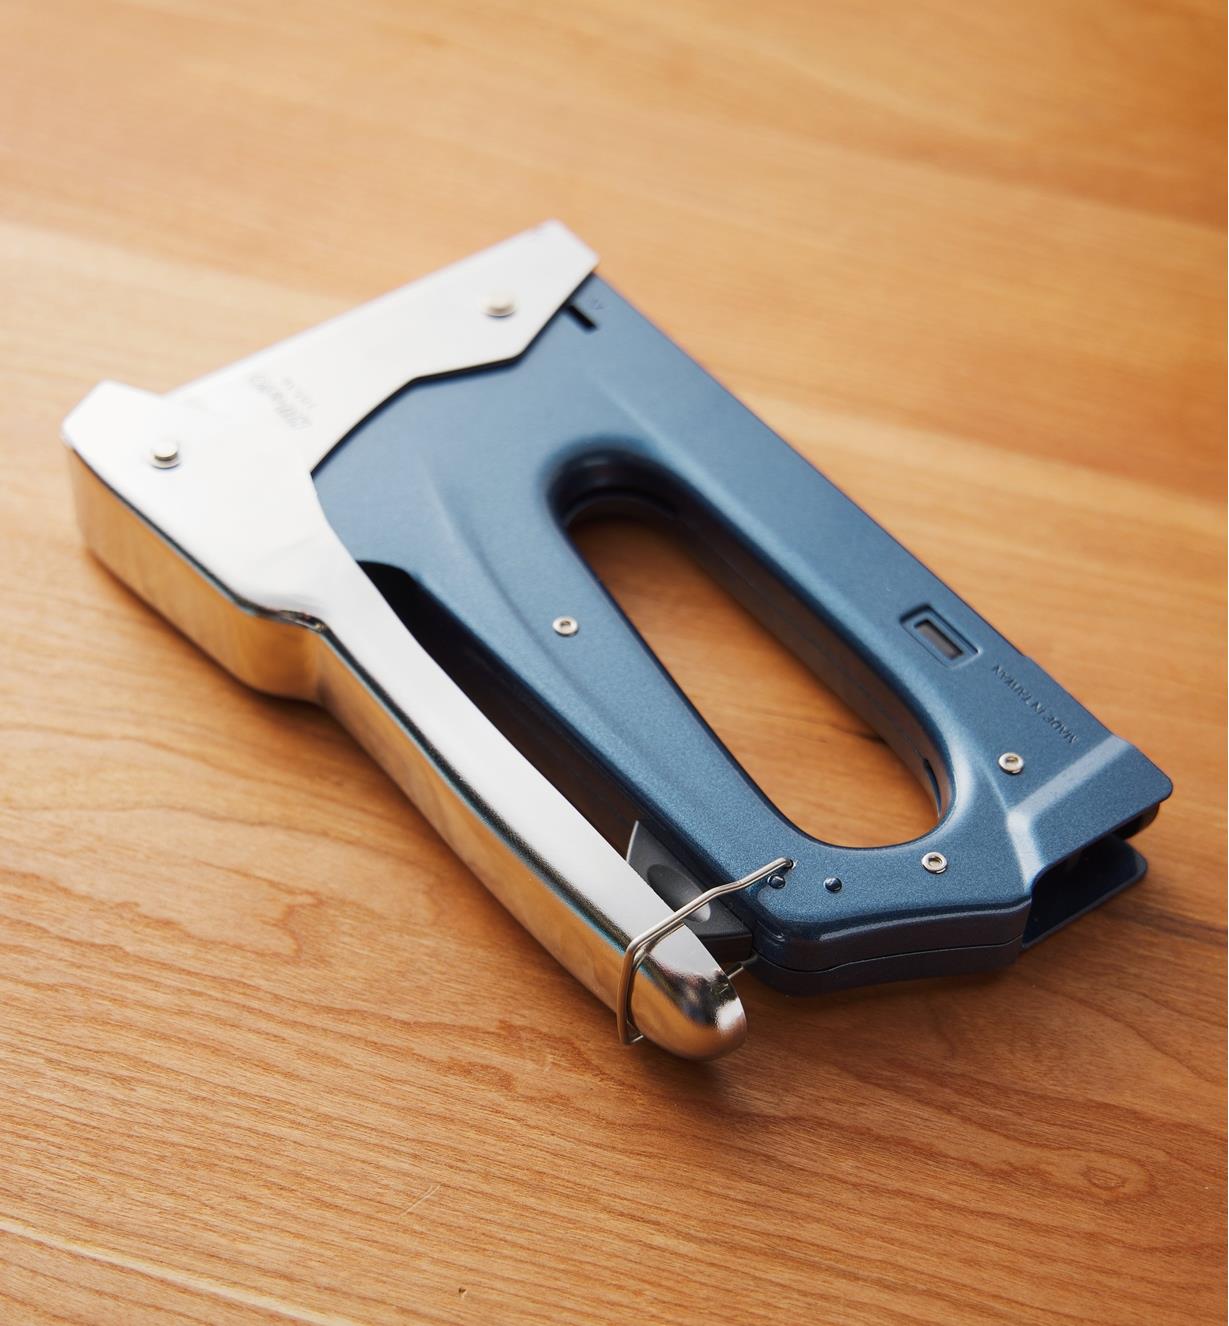 A staple gun with the lock on the handle